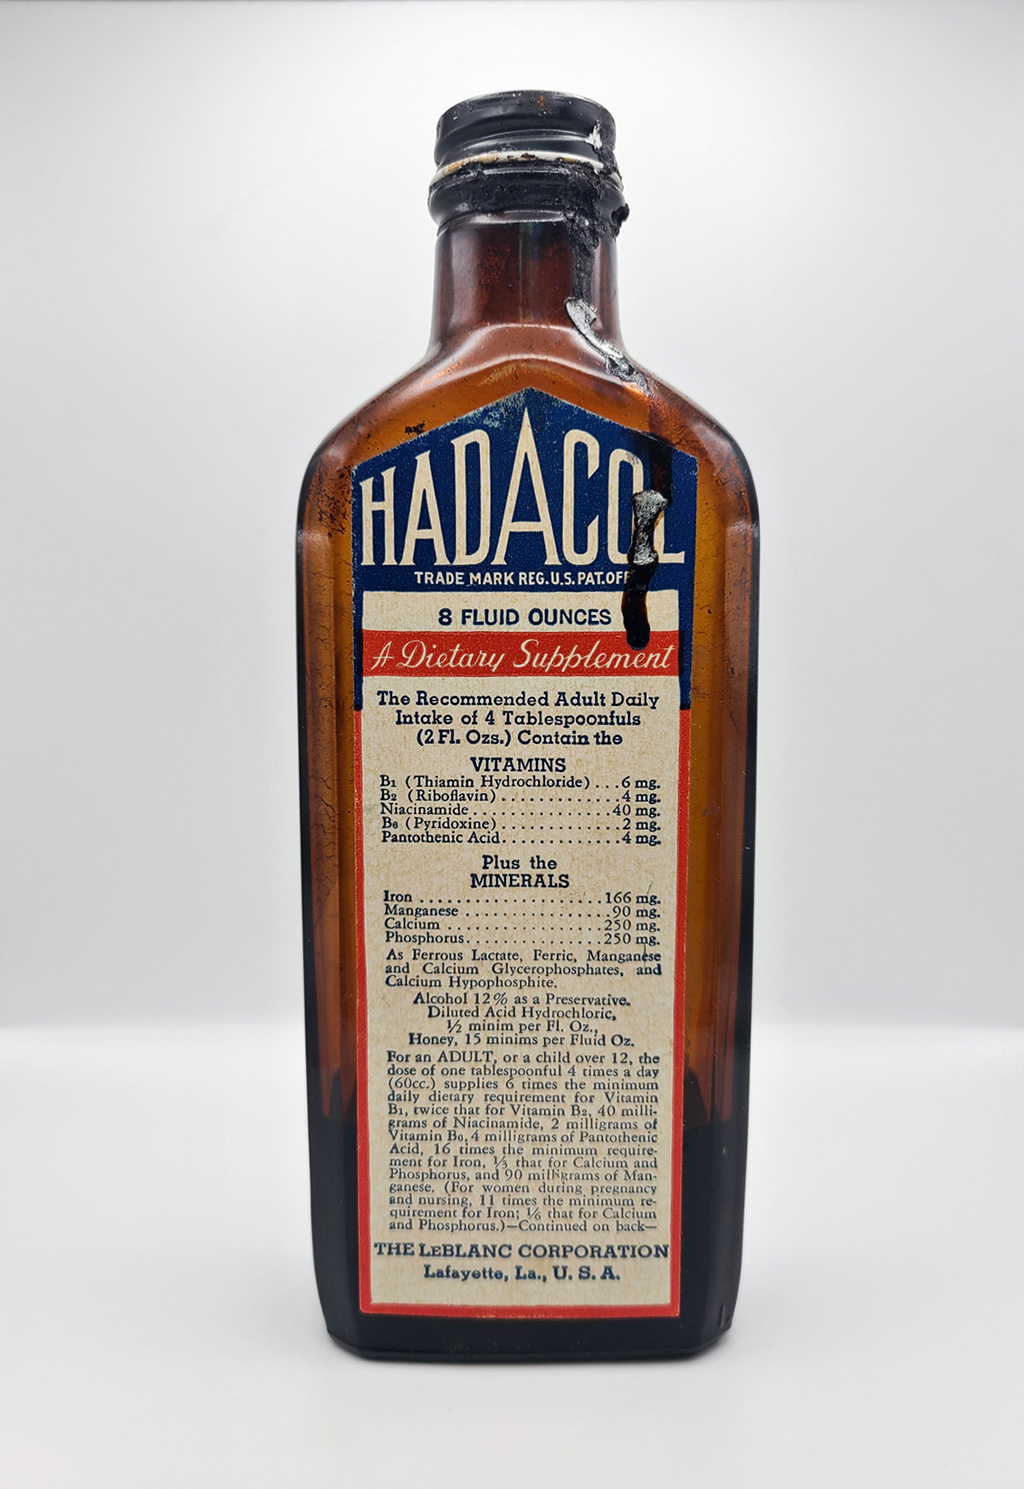 A brown bottle with a label "Hadacol" 